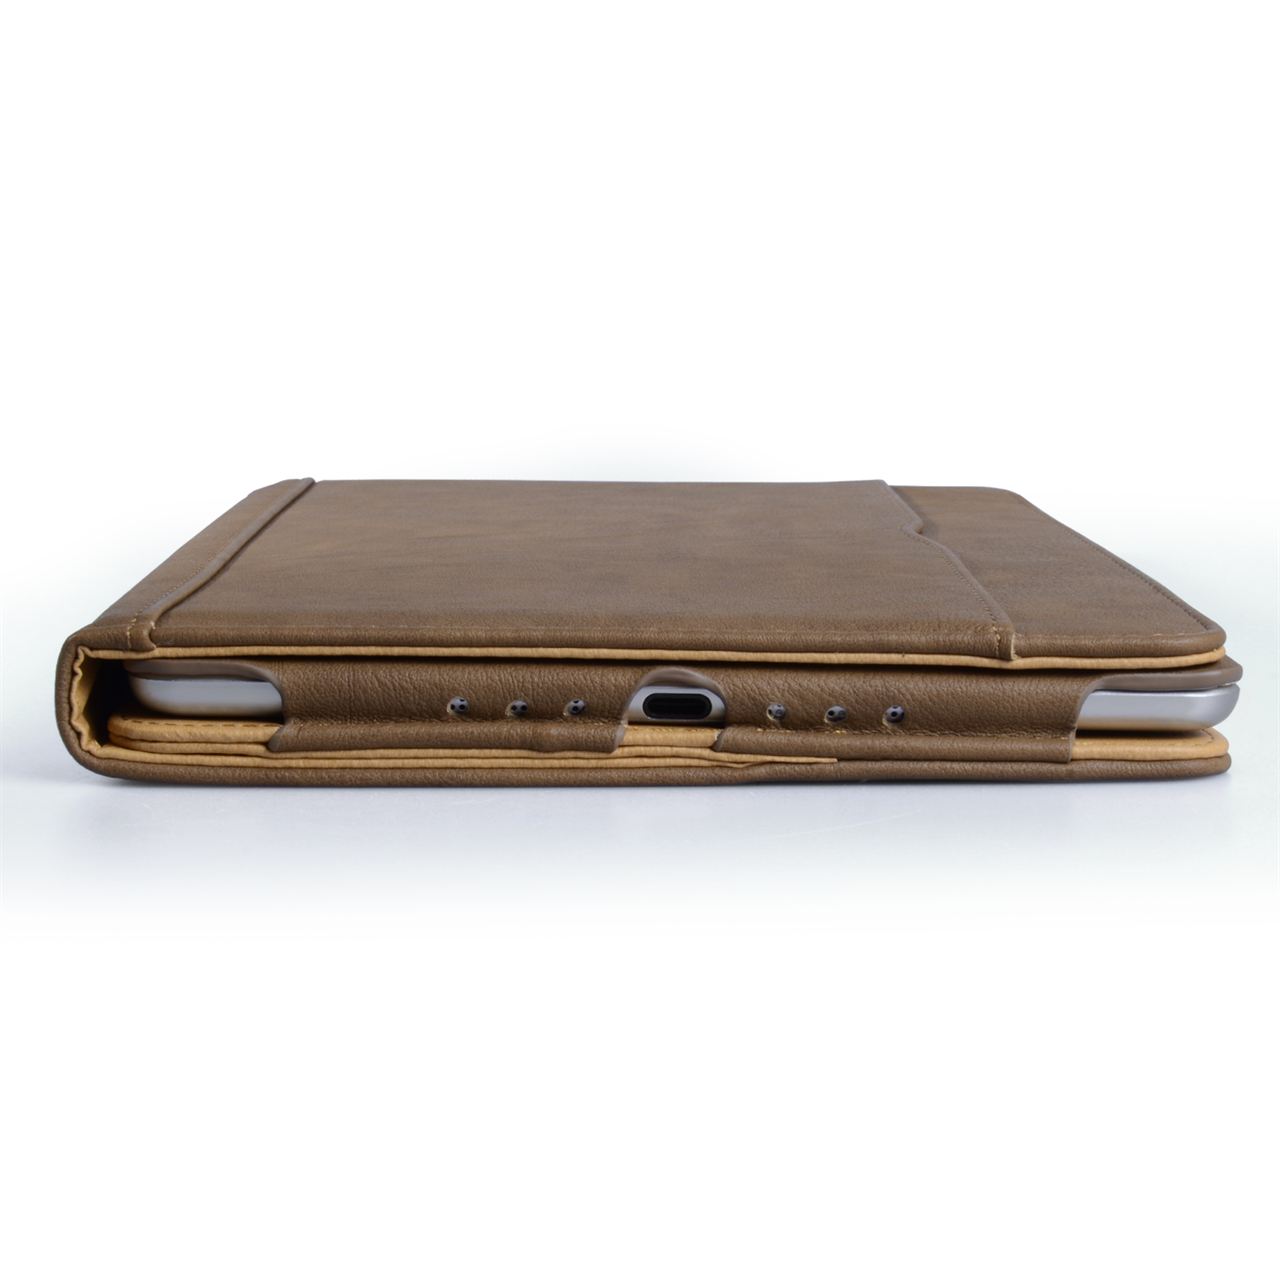 Caseflex iPad Air Textured Faux Leather Stand Case - Brown and Tan